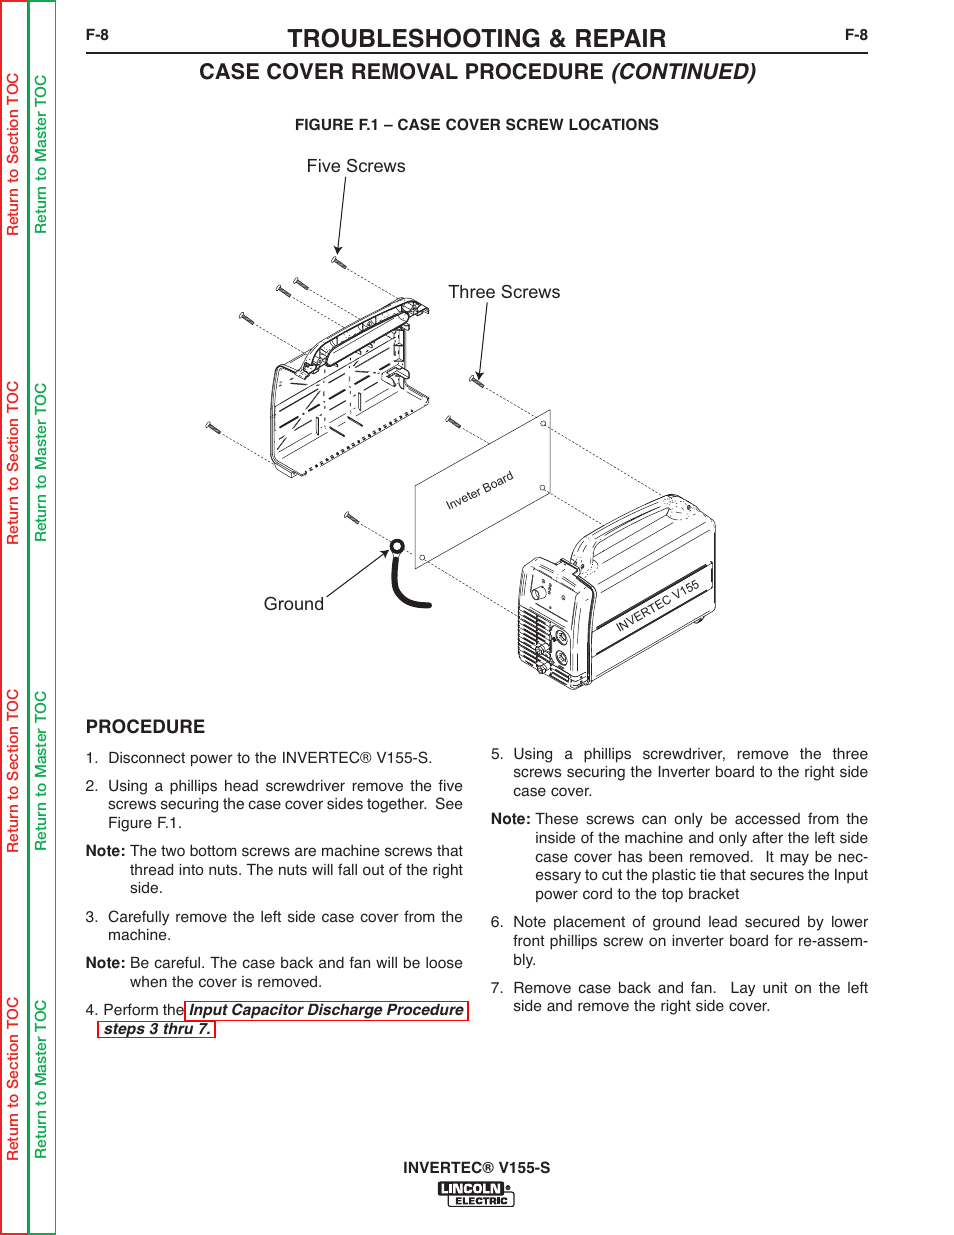 Troubleshooting & repair, Case cover removal procedure (continued) | Lincoln Electric V155-S User Manual | Page 40 / 78